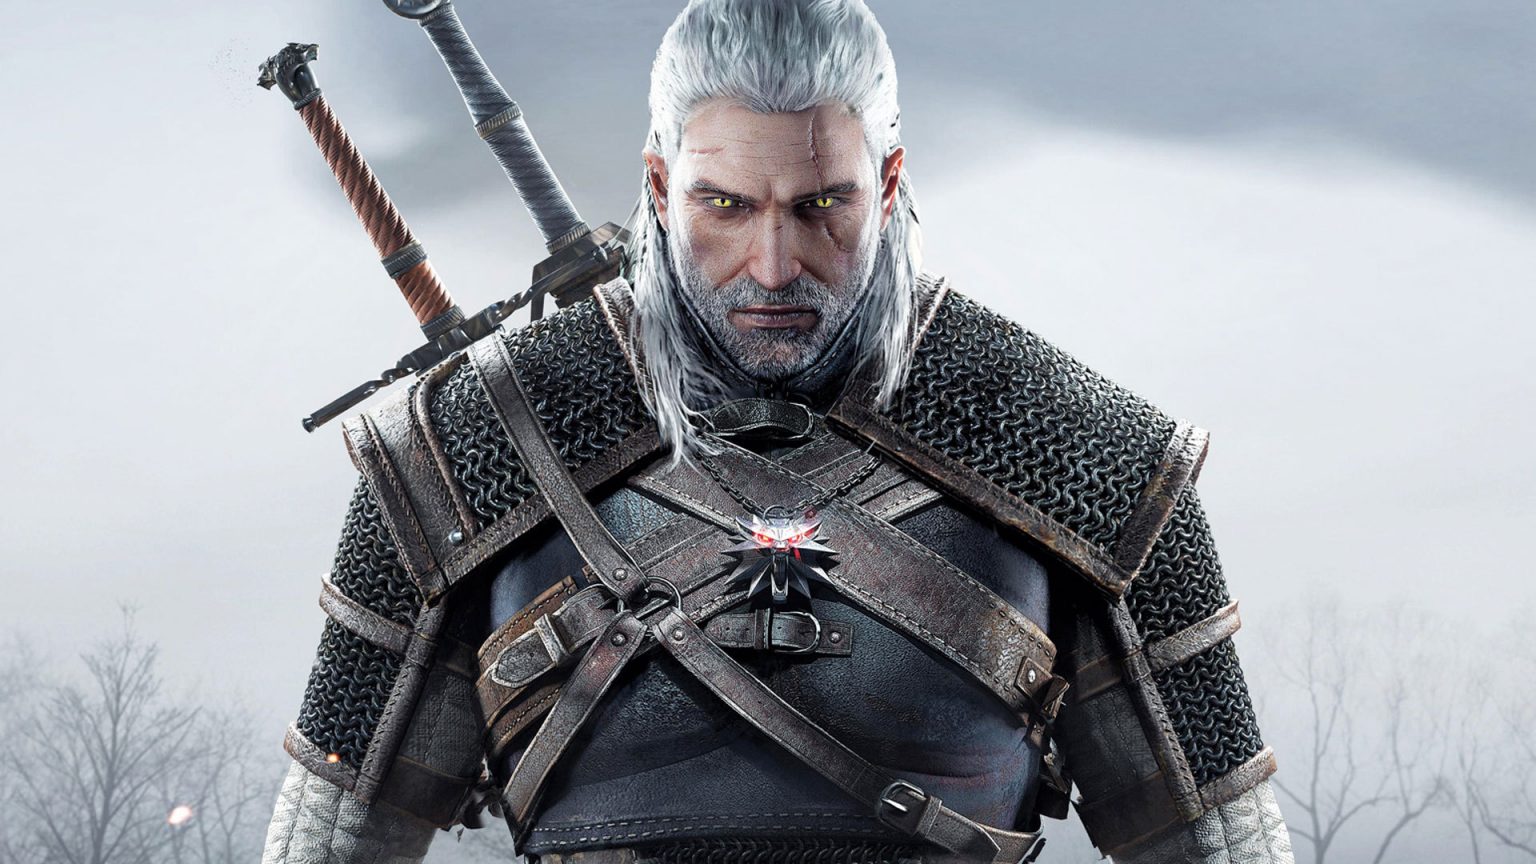 The Witcher Producer Teases 